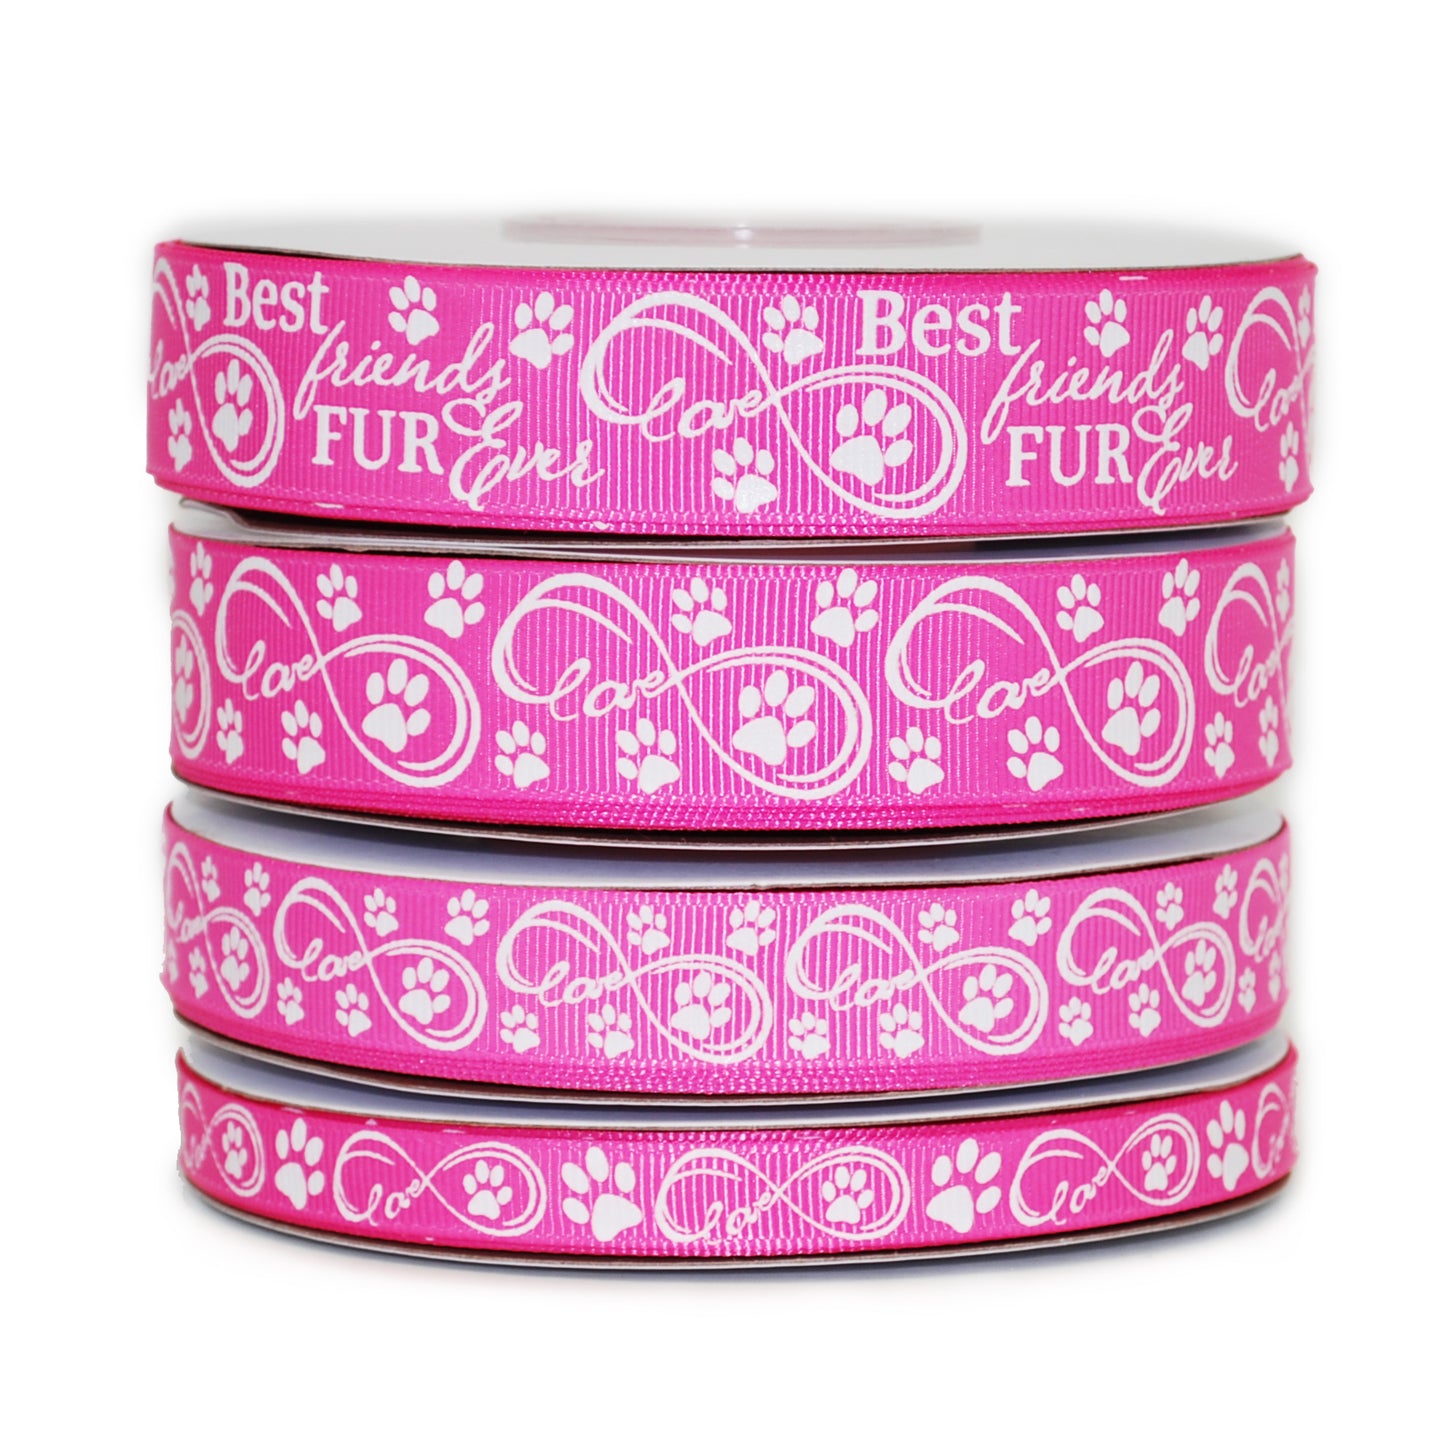 Best Friends Fur Ever Grosgrain Ribbon Collection On Hot Pink